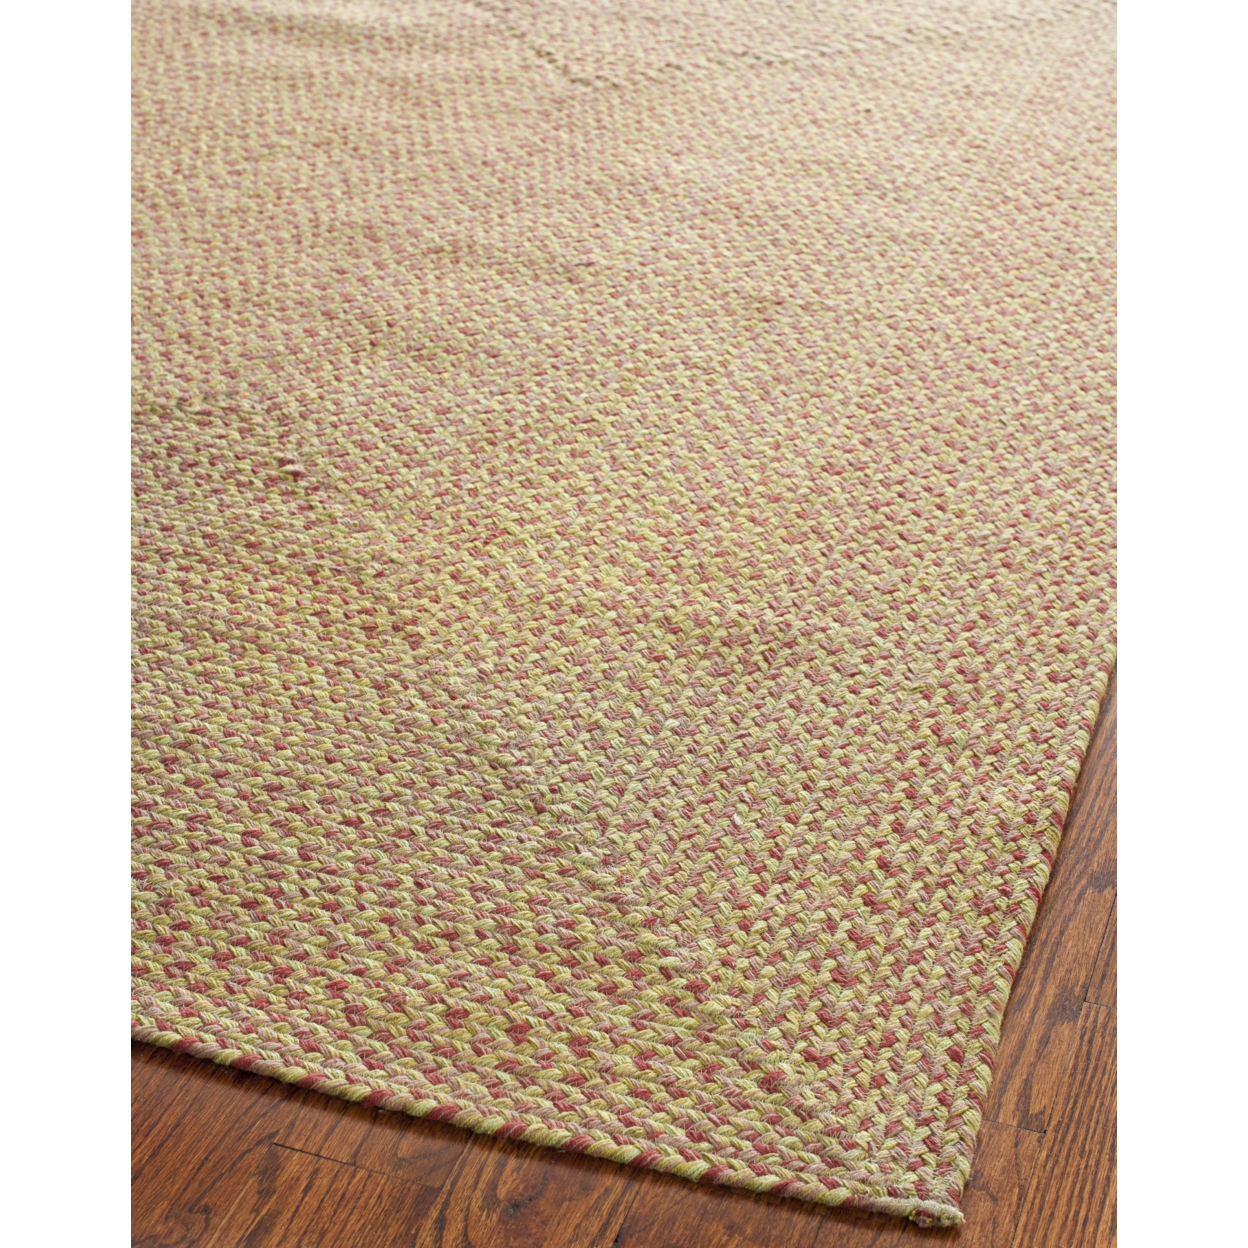 SAFAVIEH Braided Collection BRD164A Handwoven Multi Rug - 4' X 6'